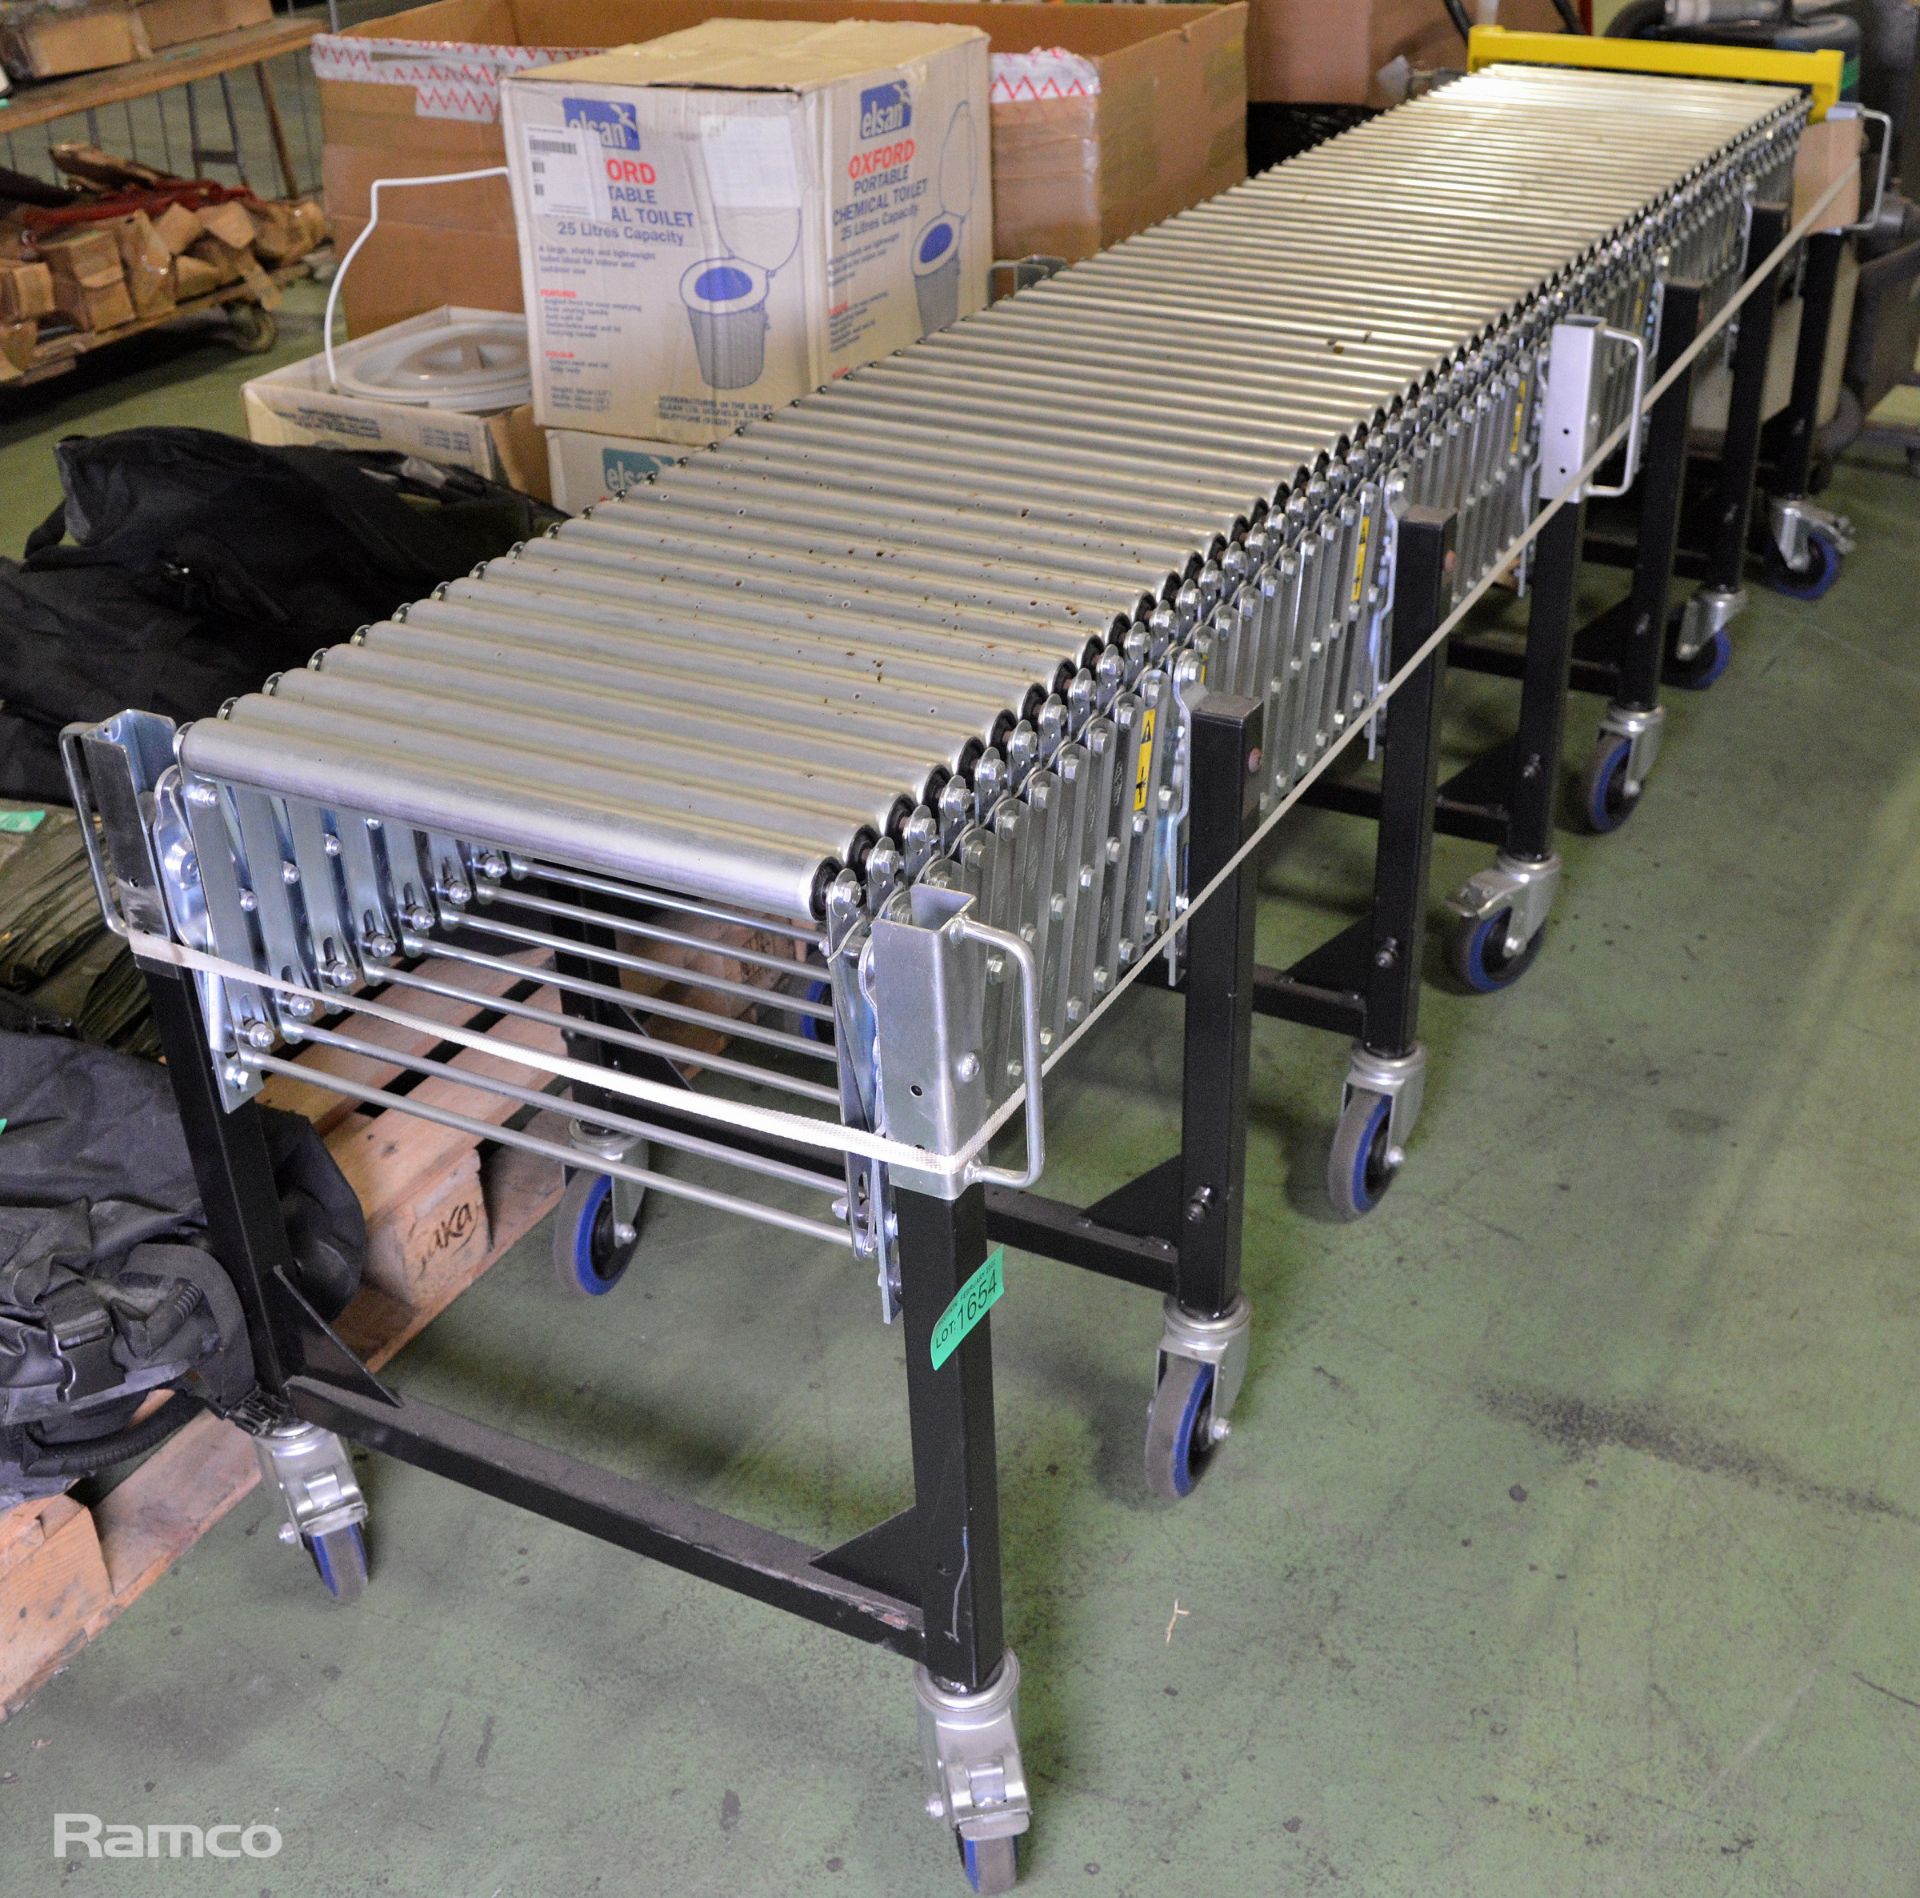 Flexible Steel Roller Conveyor System Max - L 6100mm (extended) x W 700mm x H 750mm